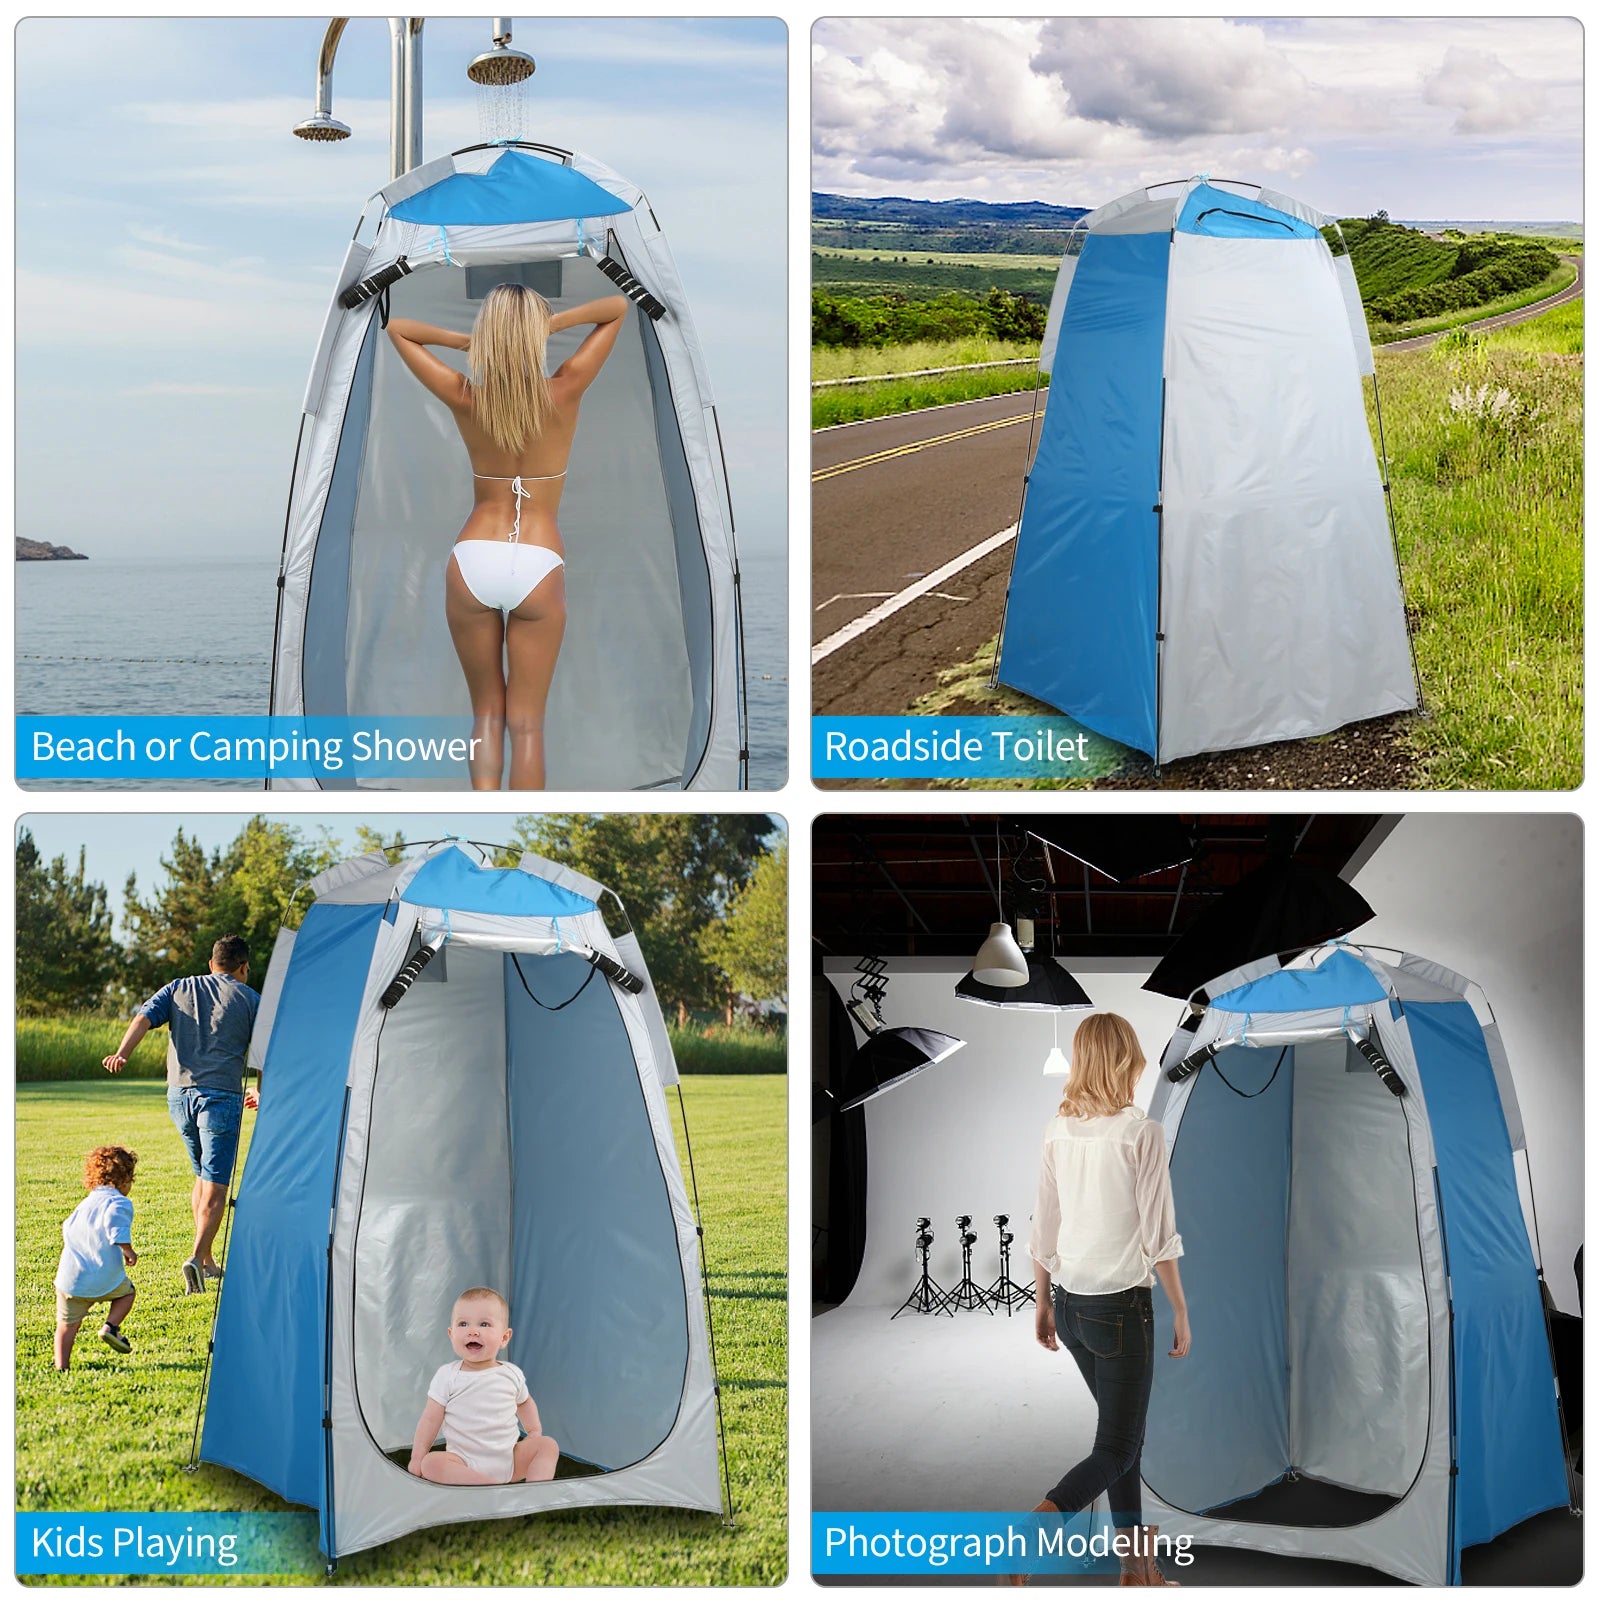 Portable Shower Toilet Changing Tent Sun Rain Shelter Privacy Shelter Tent with Window for Outdoor Camping Beach Bathroom